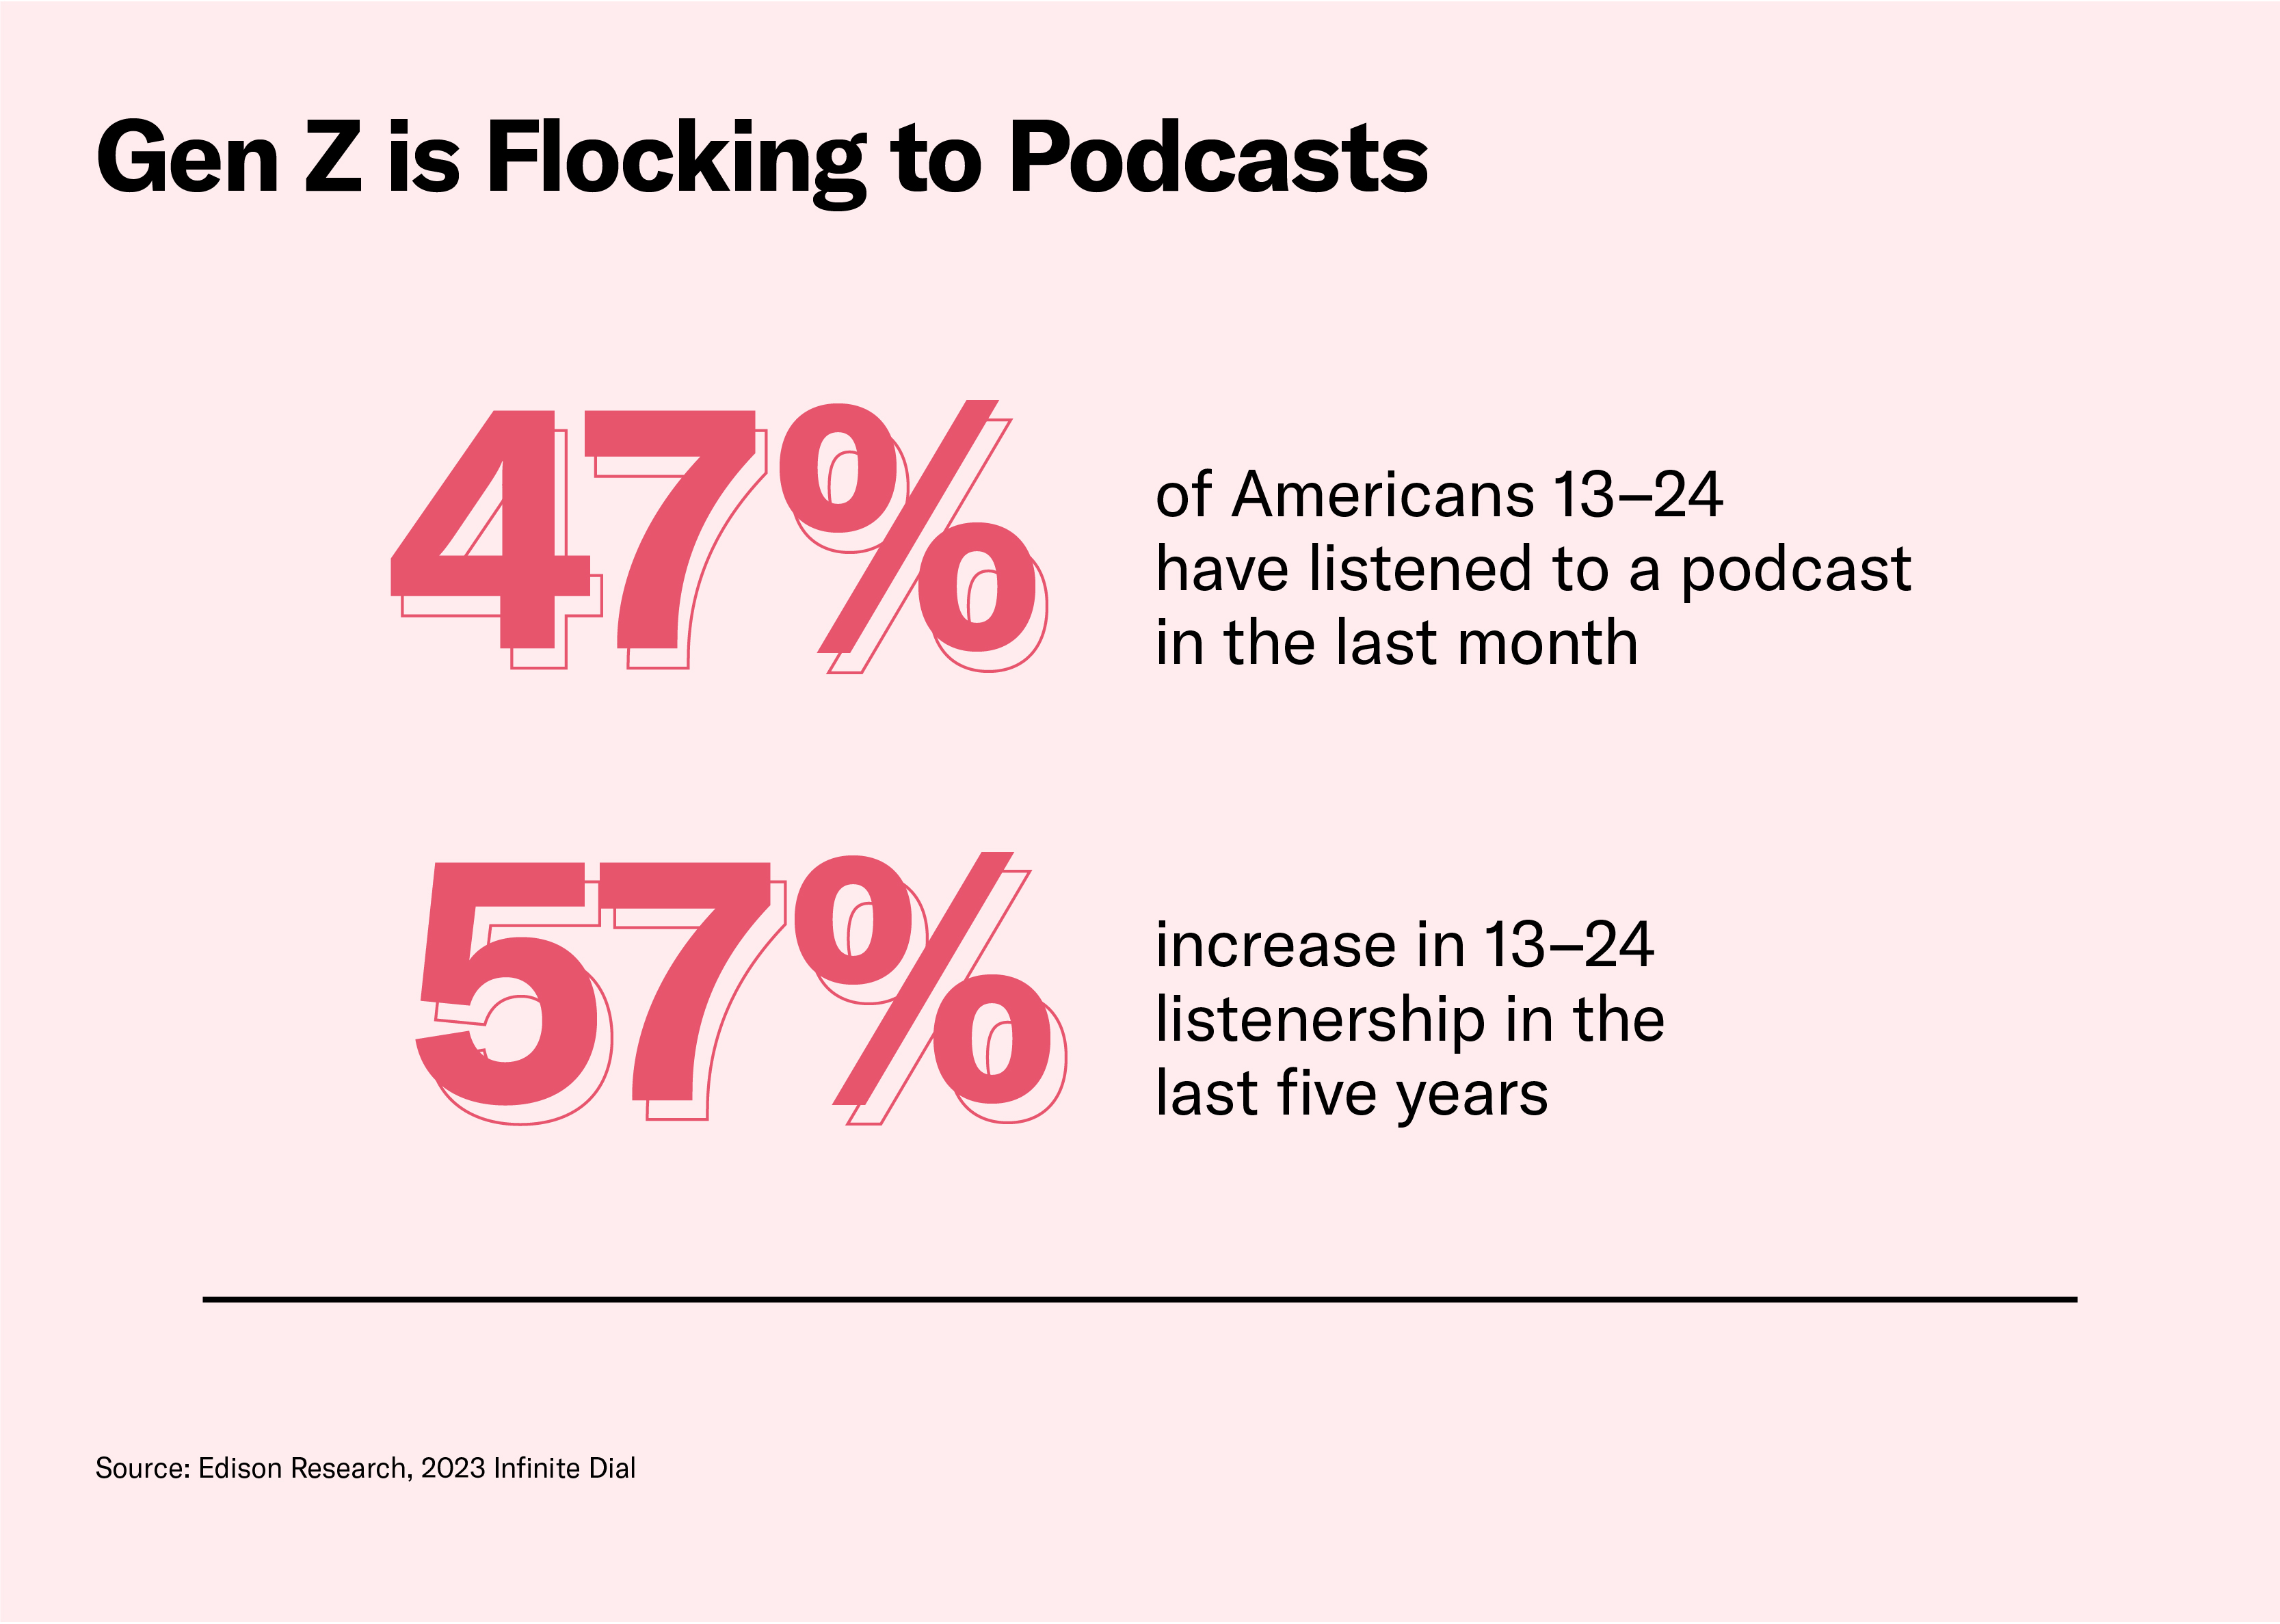 47% of Gen Z is listening to podcasts